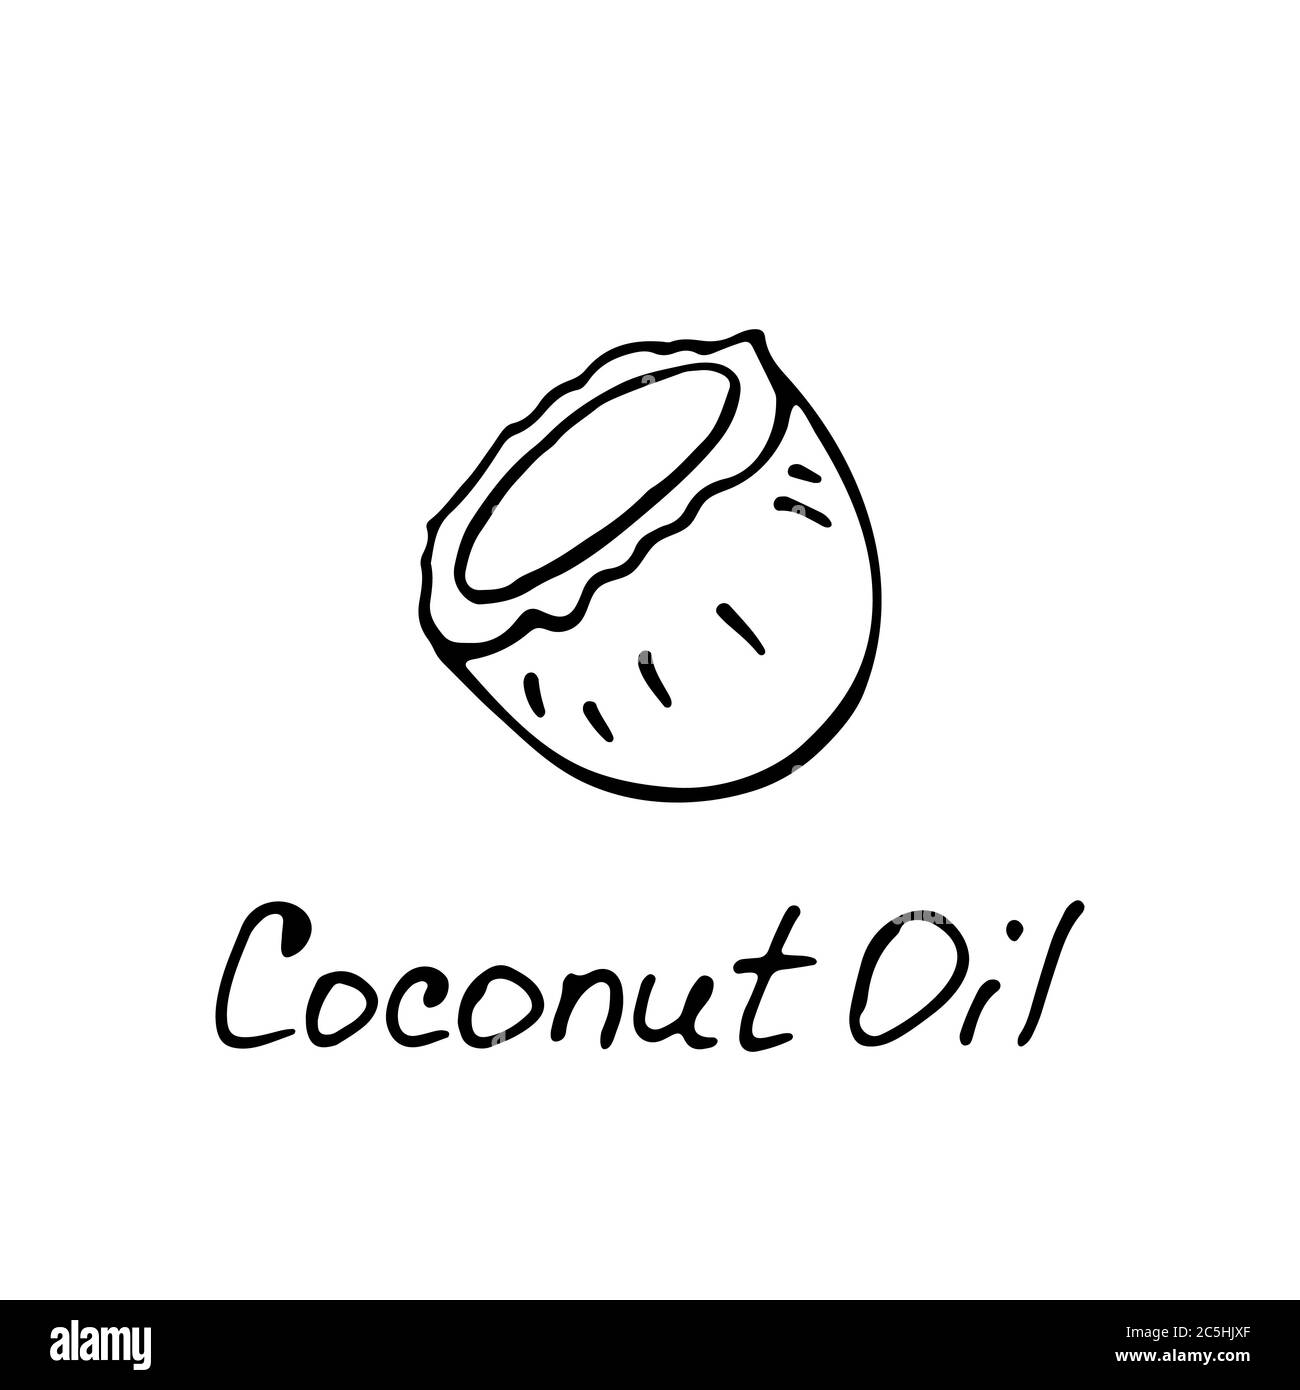 Coconut oil. Cosmetic ingredient. Nutritional oil for skin care. Hand-drawn icon of coconut. Vector illustration. Stock Vector